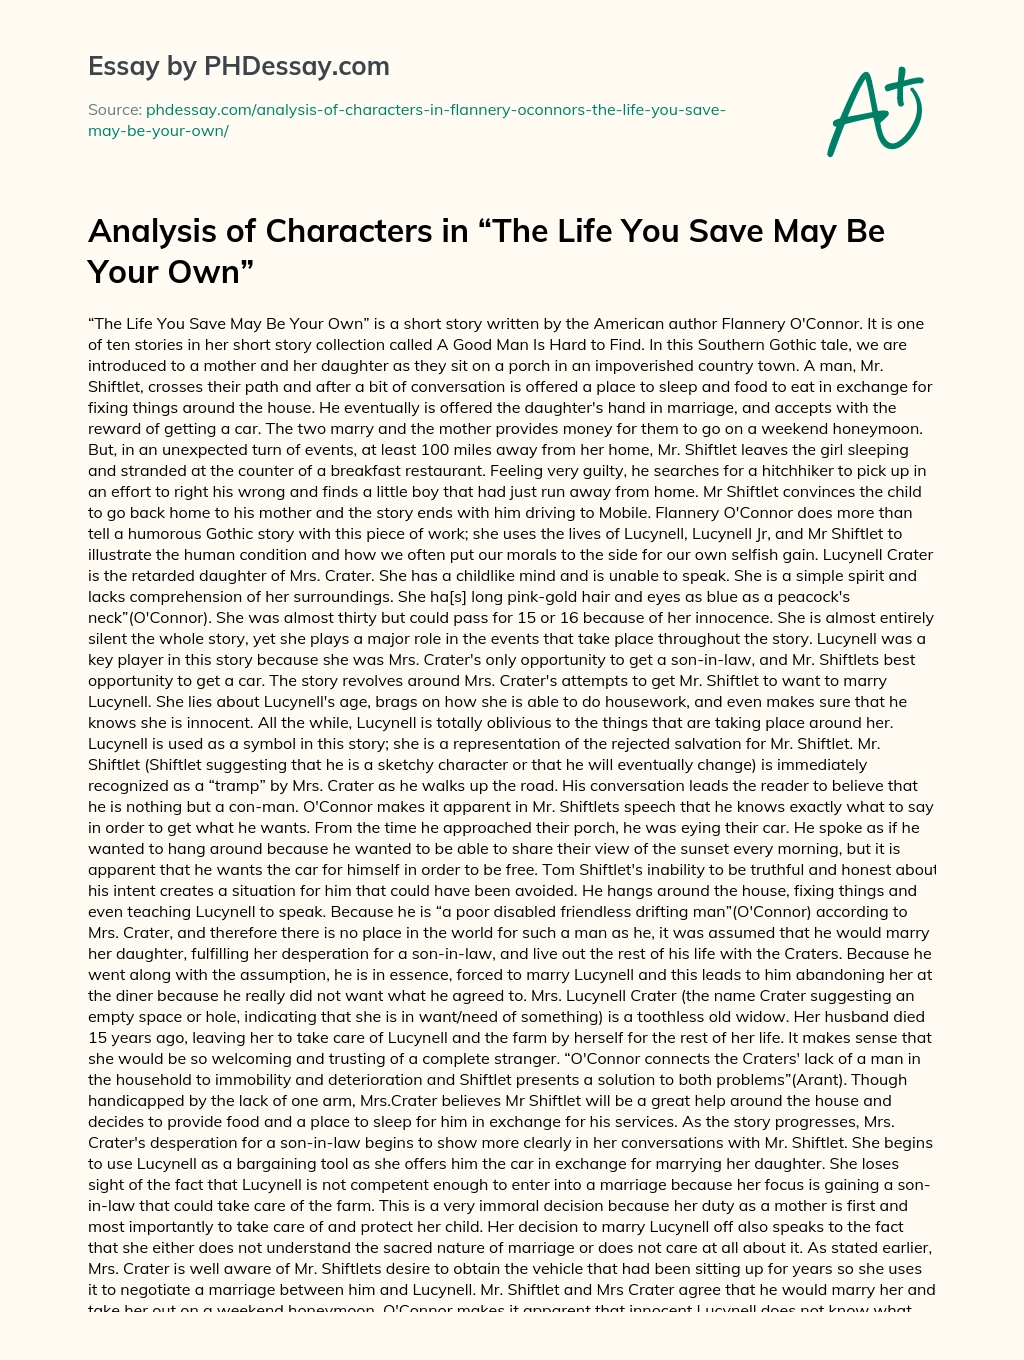 Analysis of Characters in “The Life You Save May Be Your Own” essay